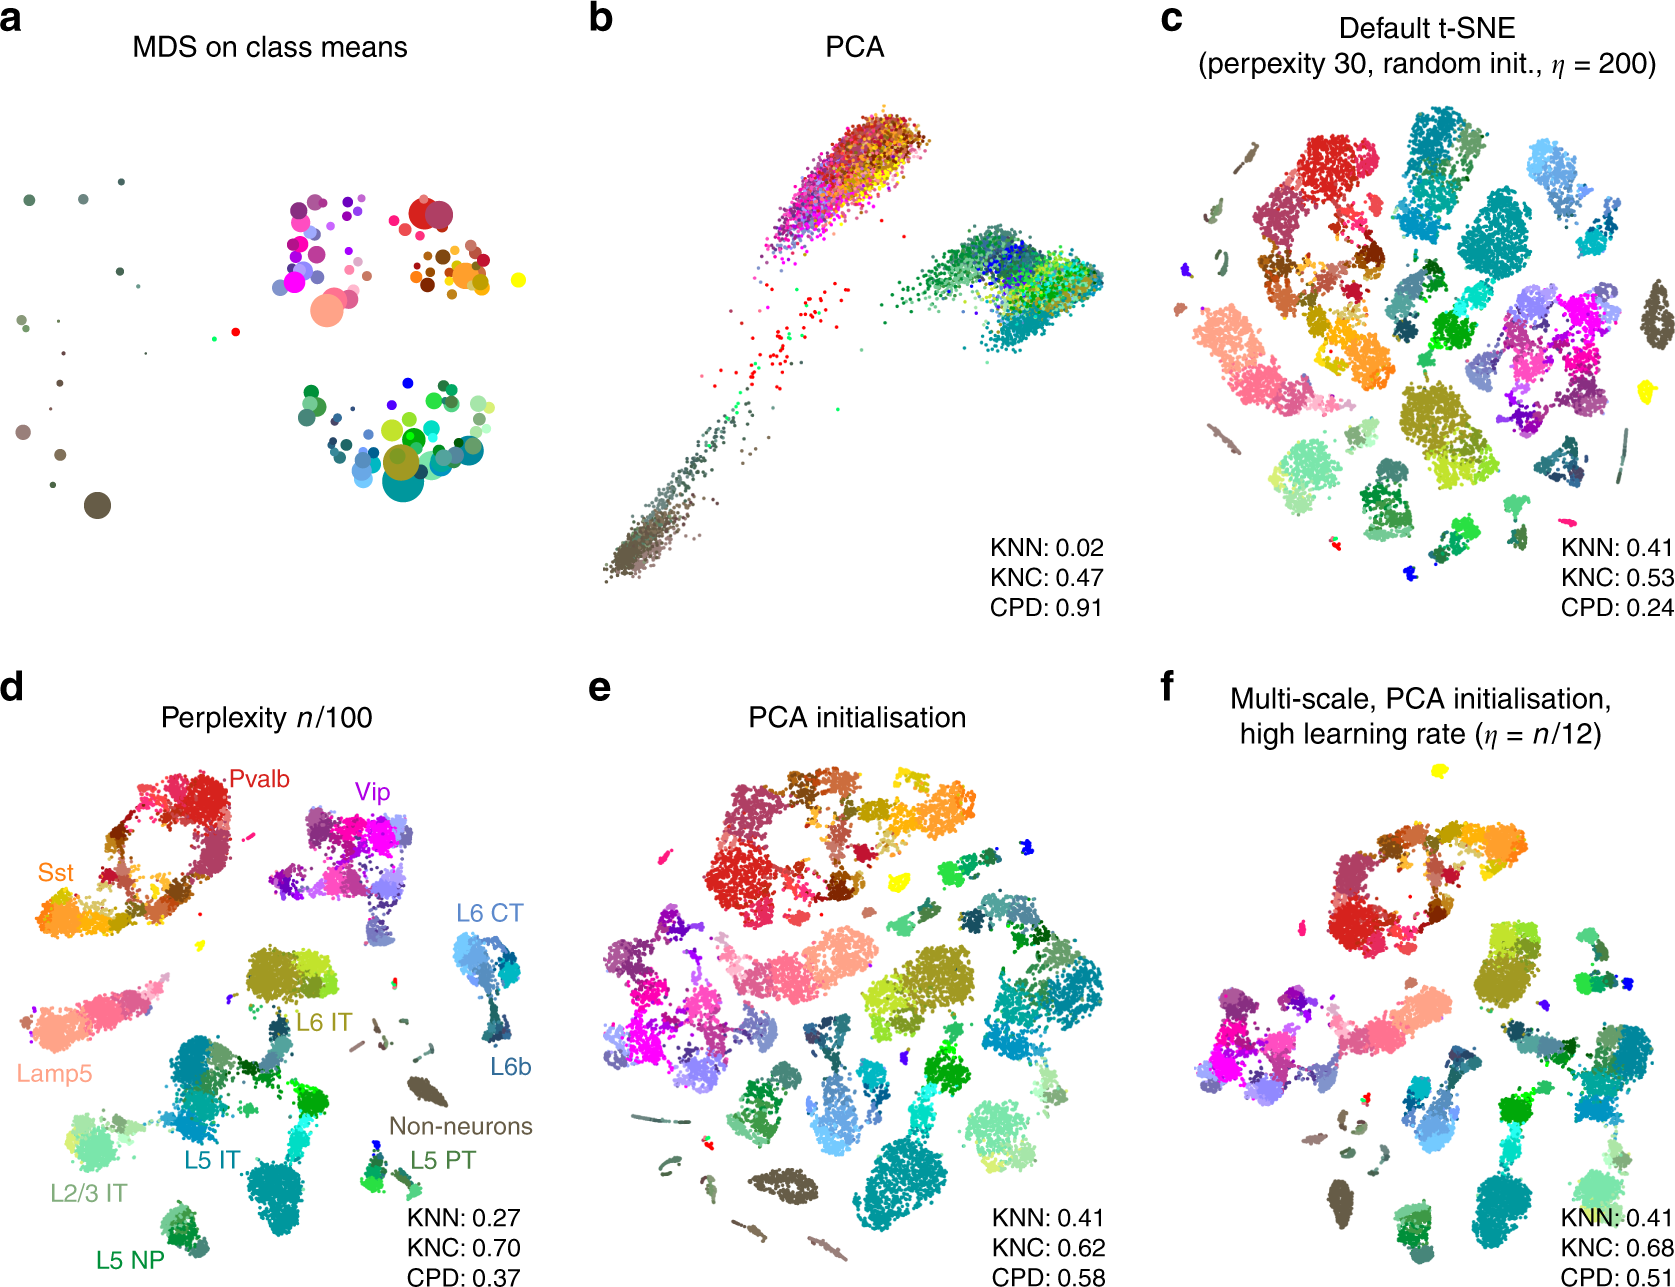 Two-dimensional visualization of single-cell data.